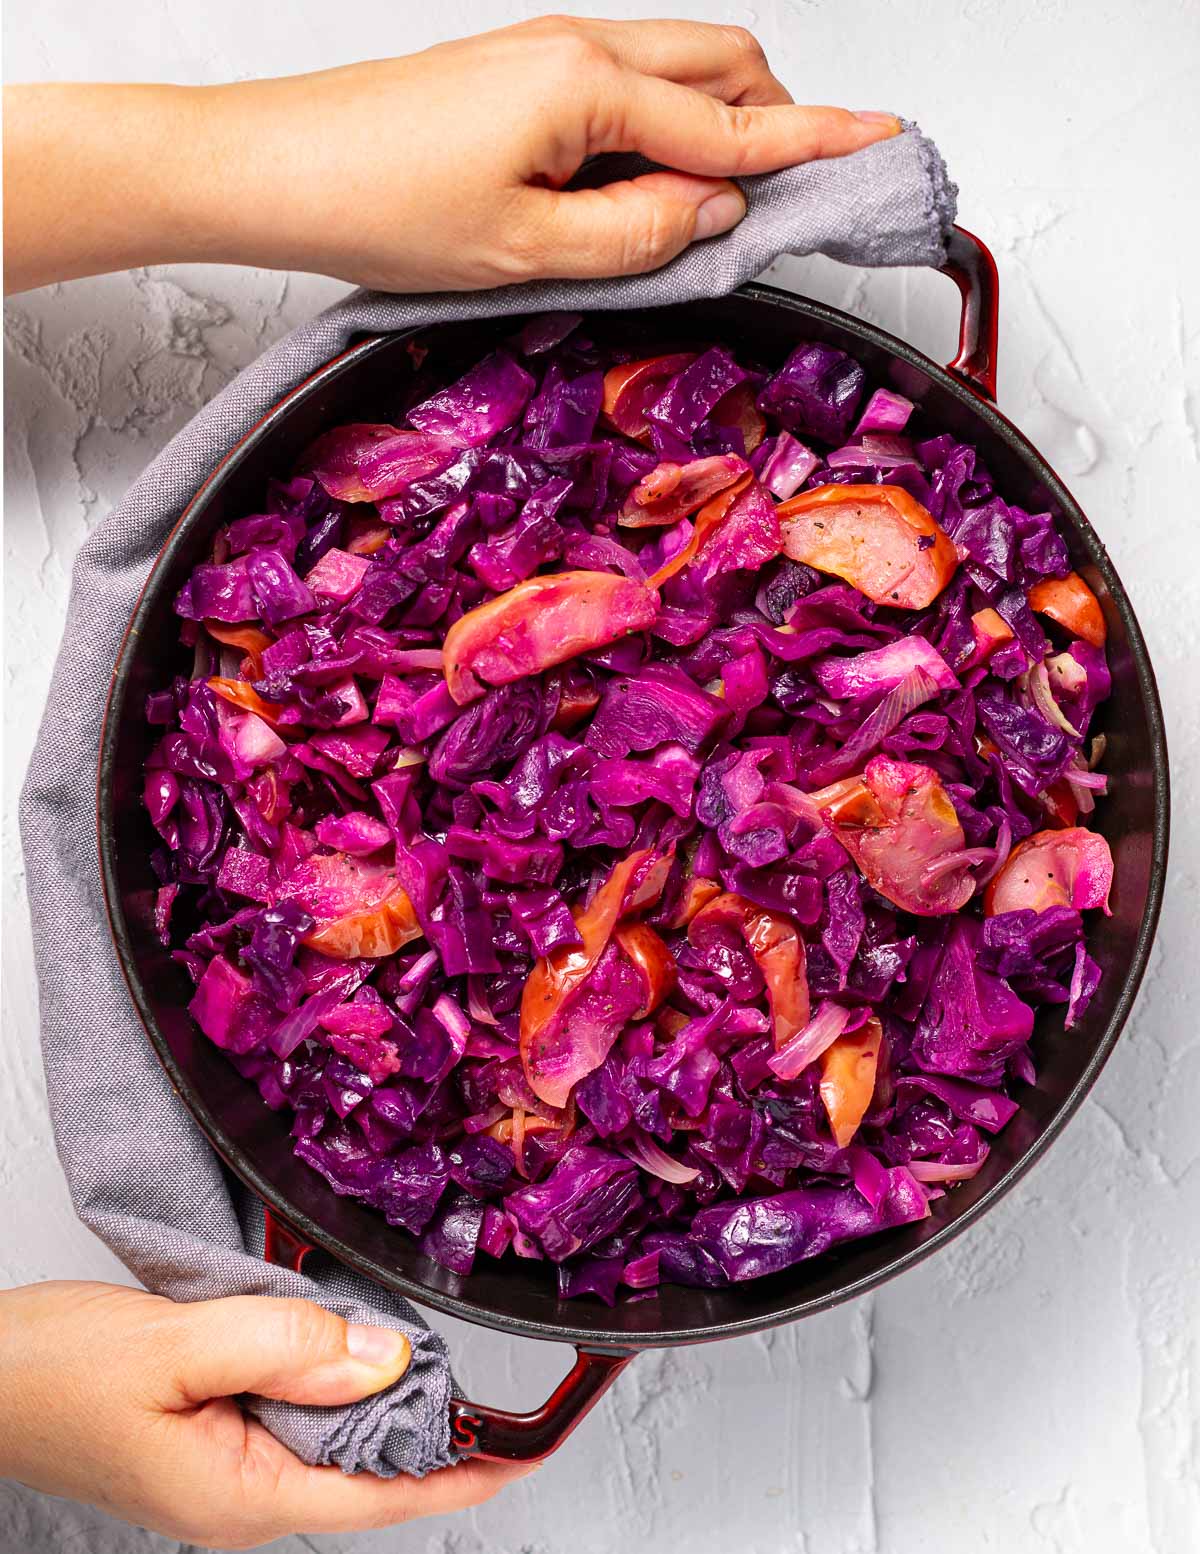 baked red cabbage and apples in a staub skillet